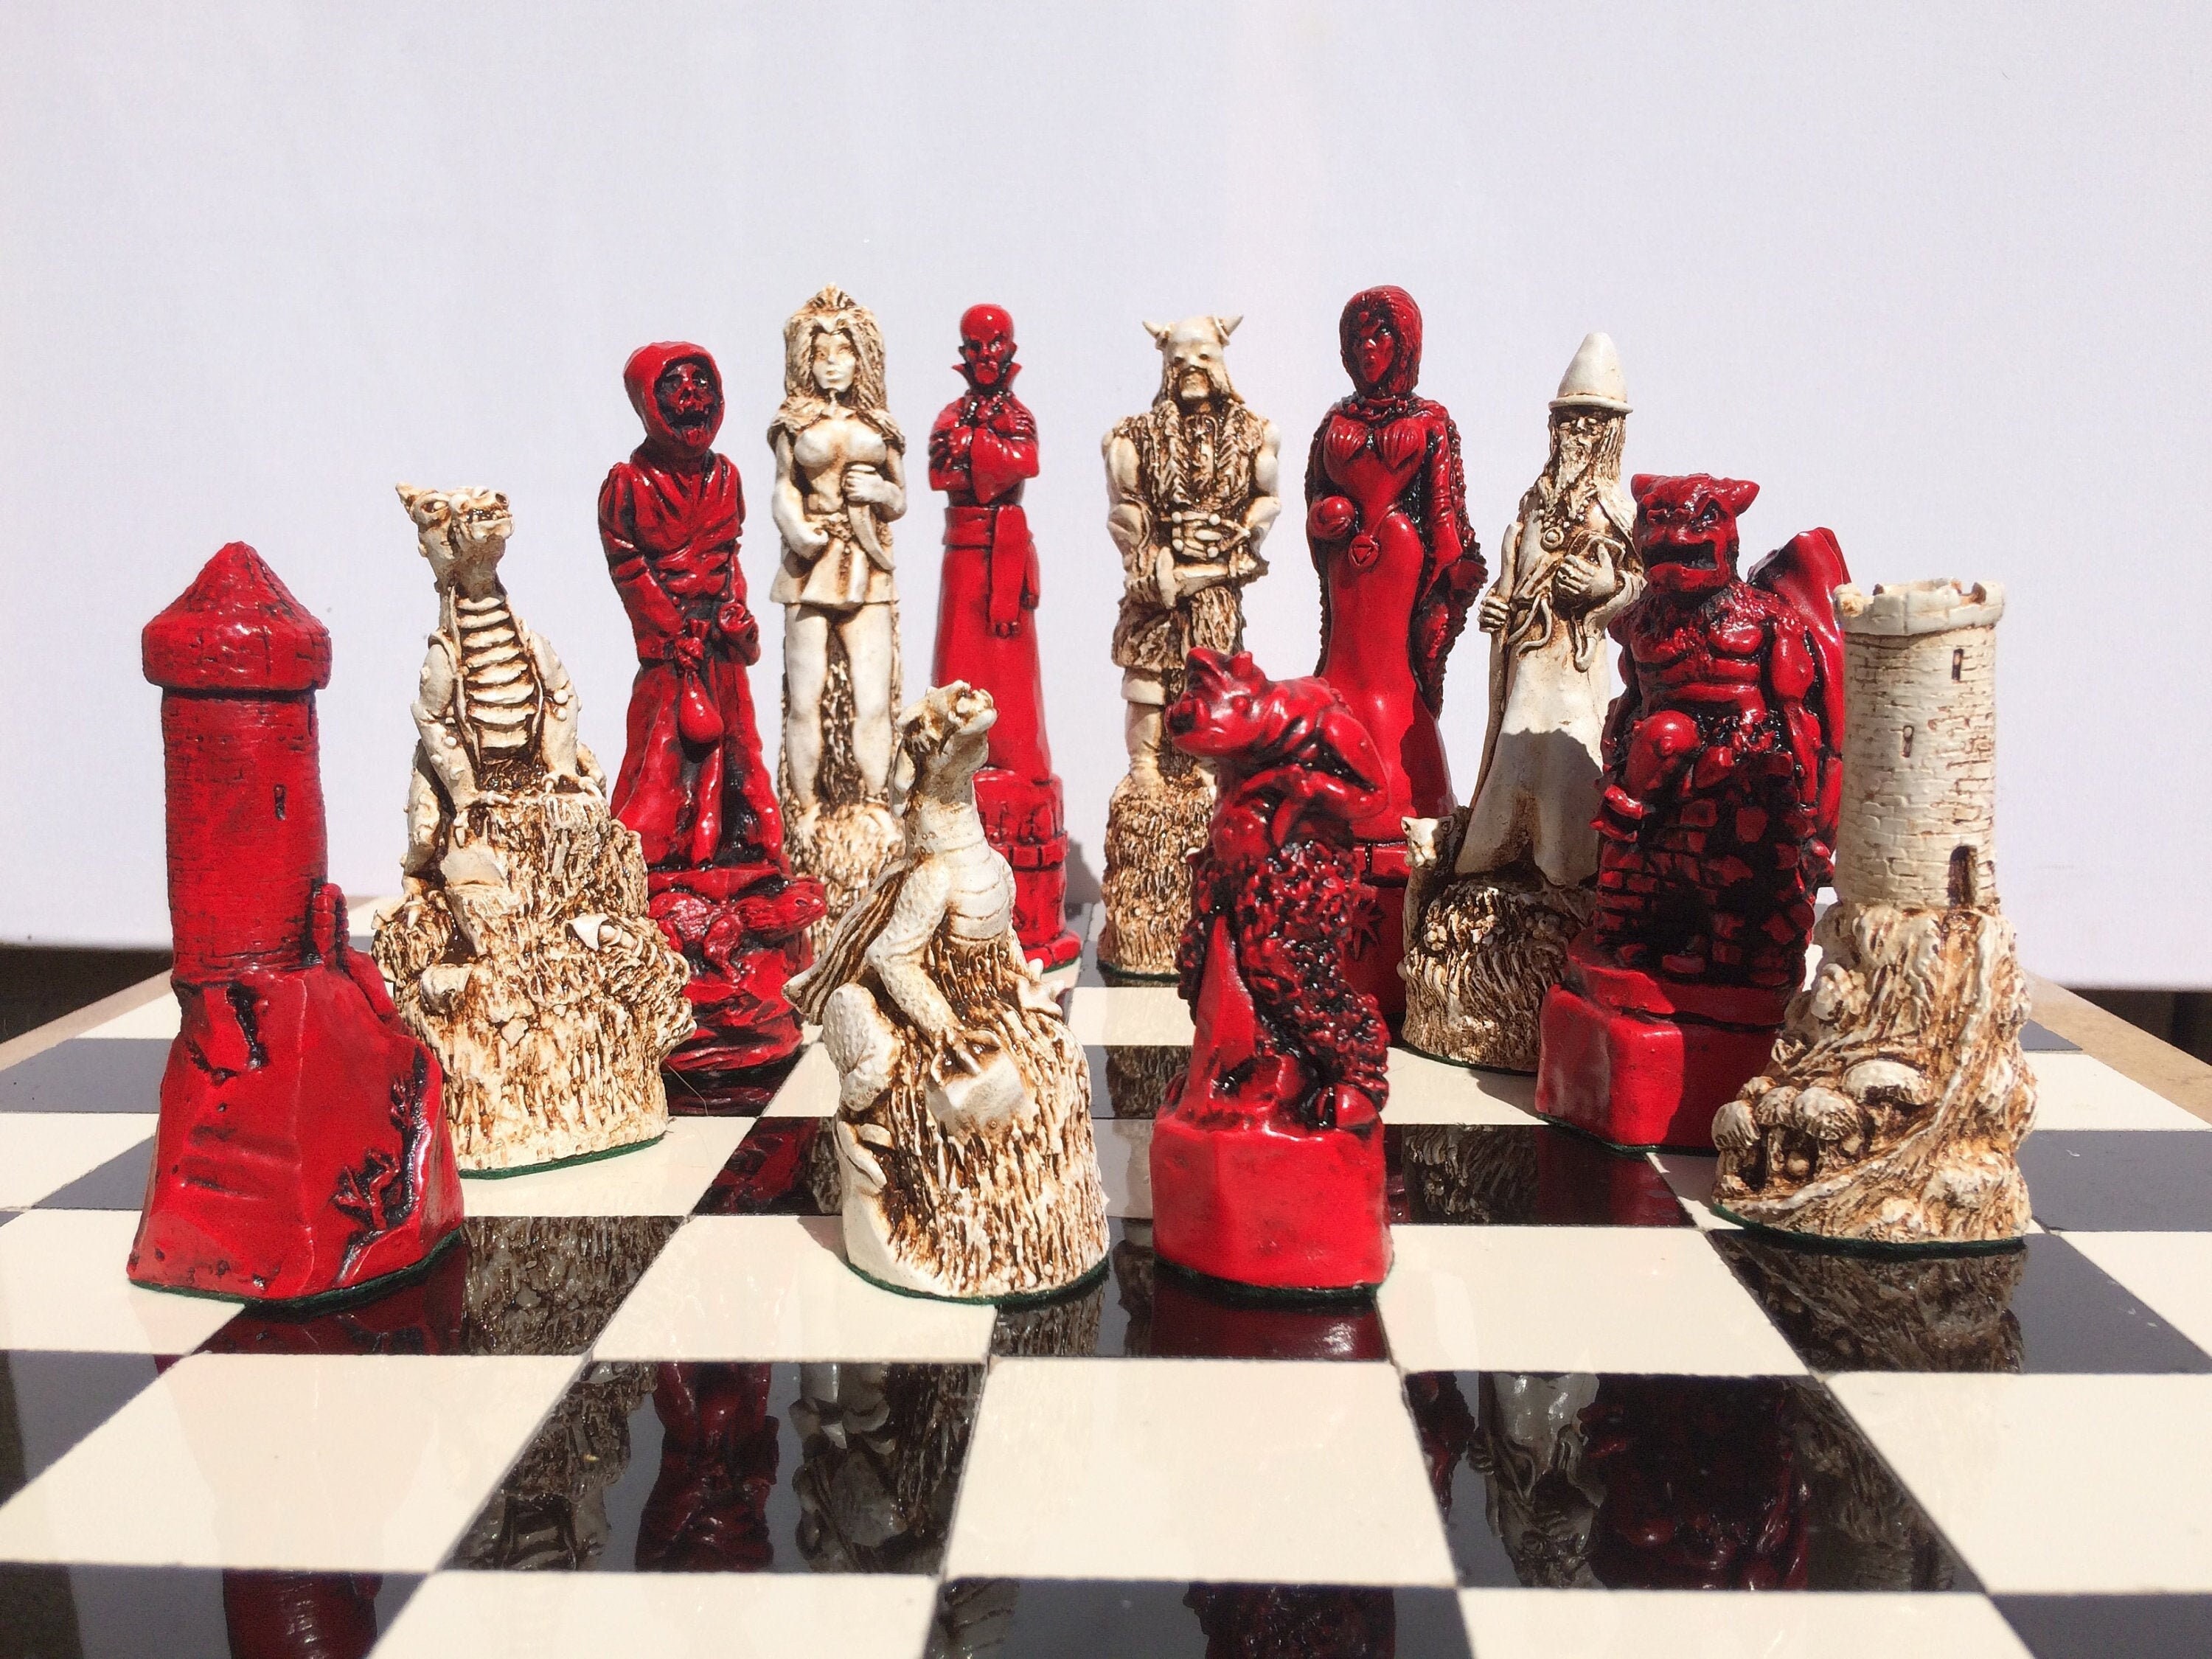 Hand Made Custom Chess Board by Wood-N-Reflections